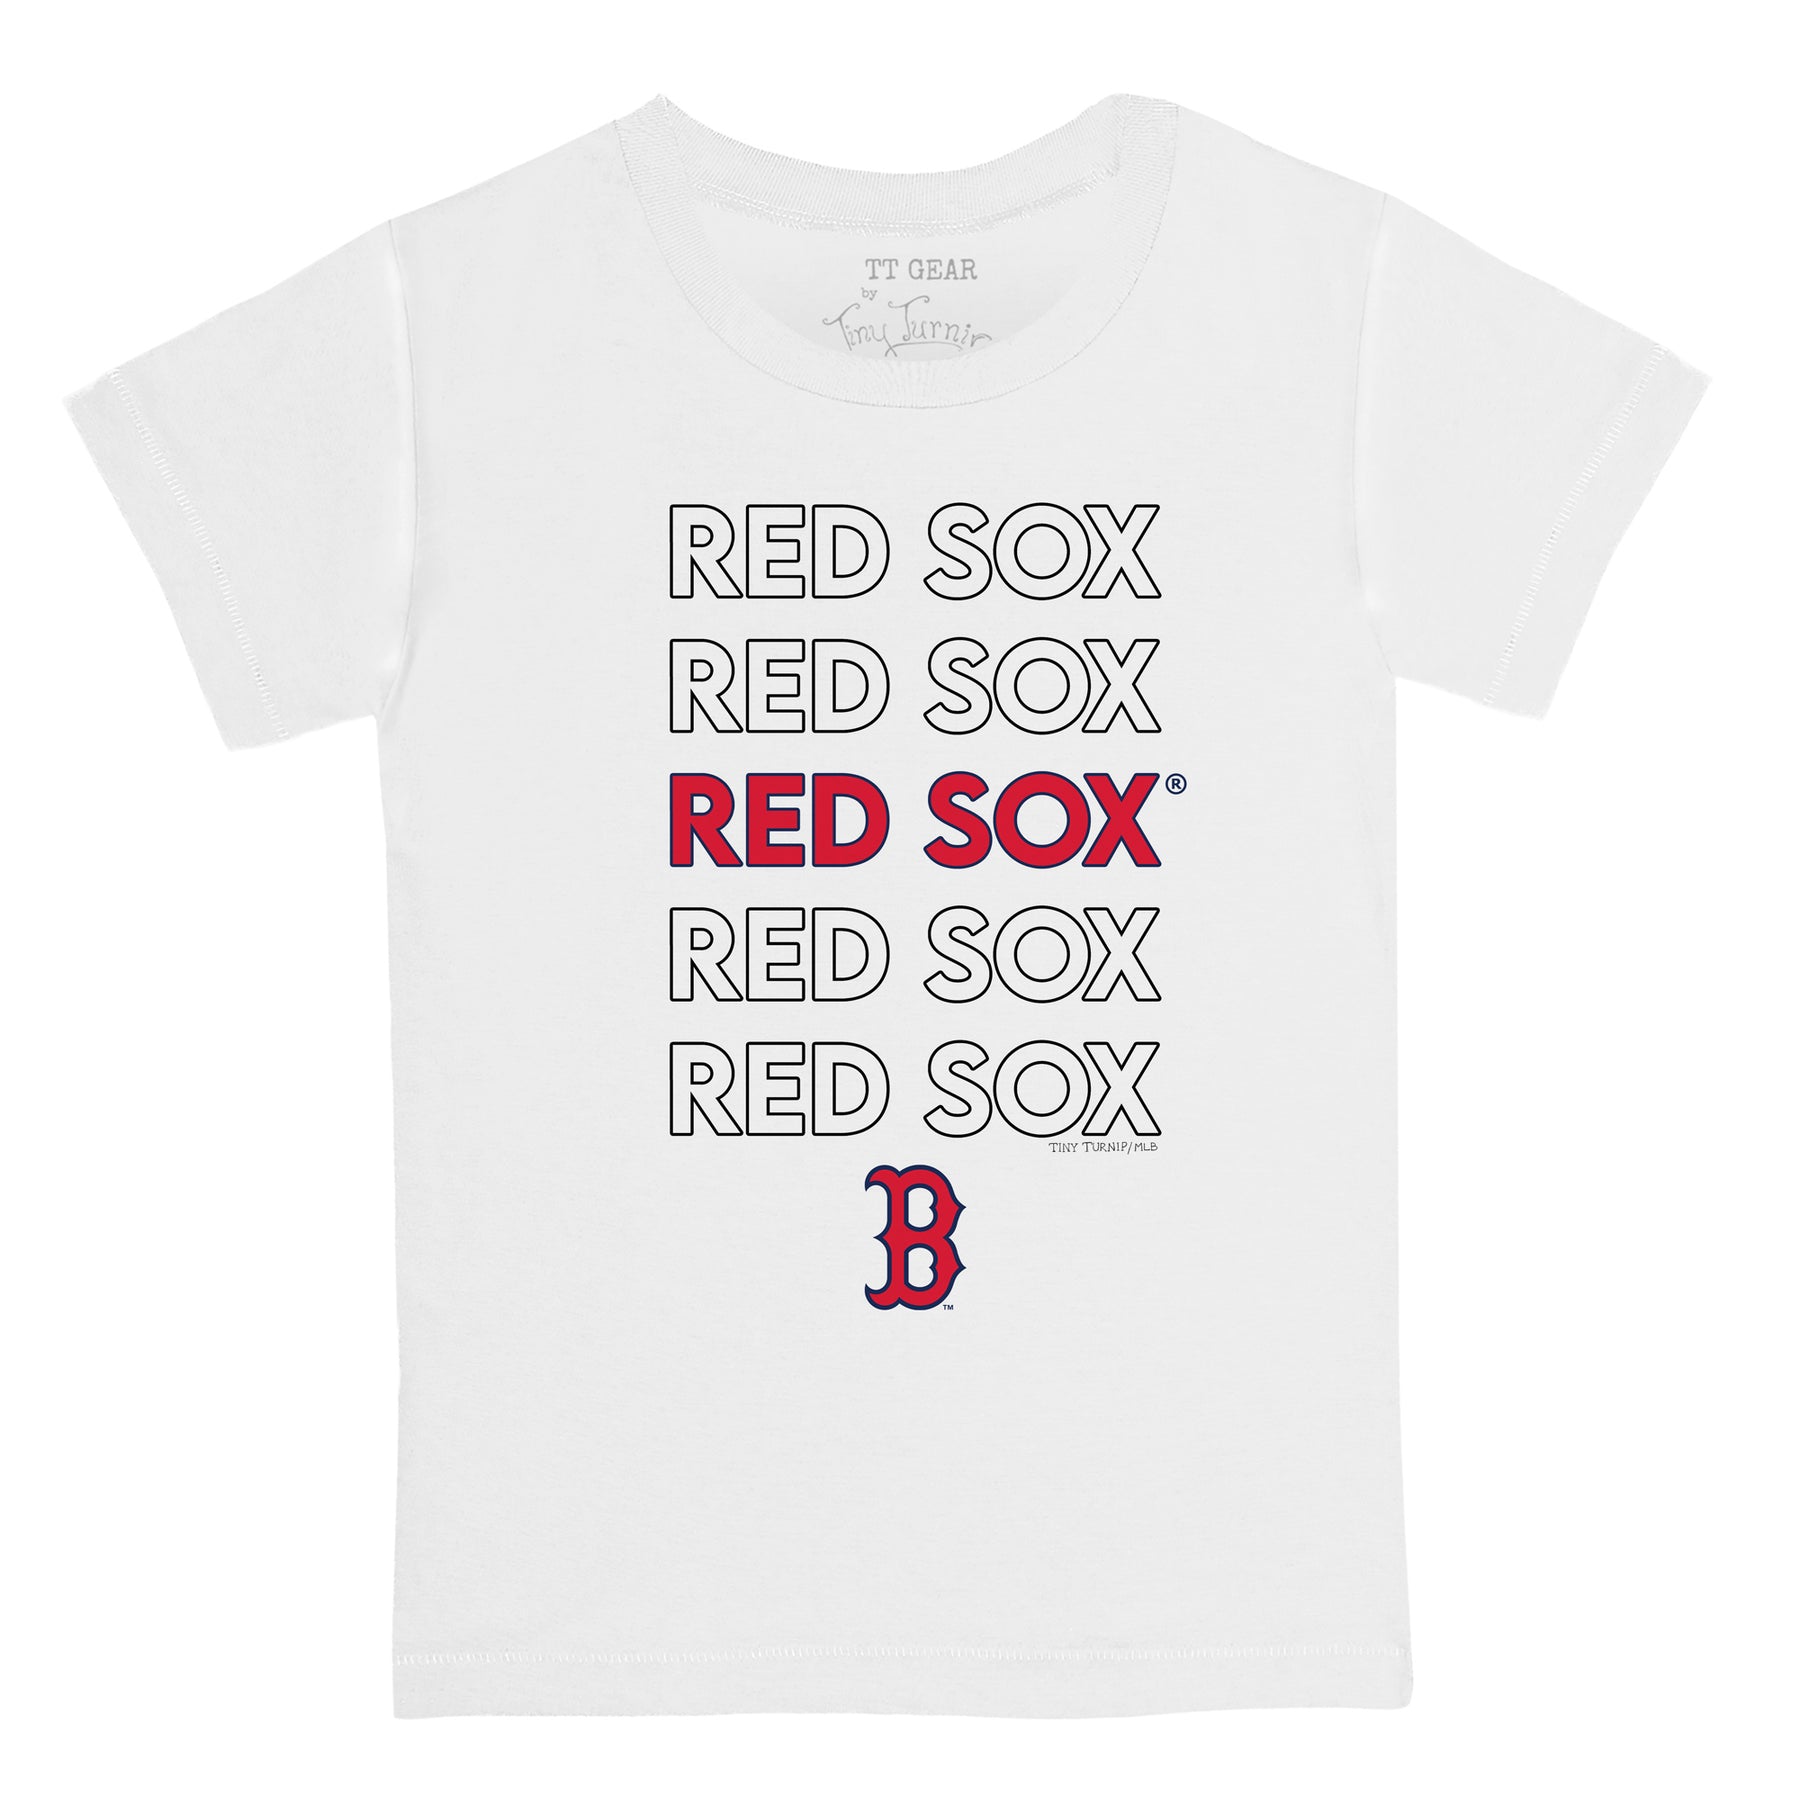 Tiny Turnip Boston Red Sox Stacked Tee Shirt Women's Large / Red